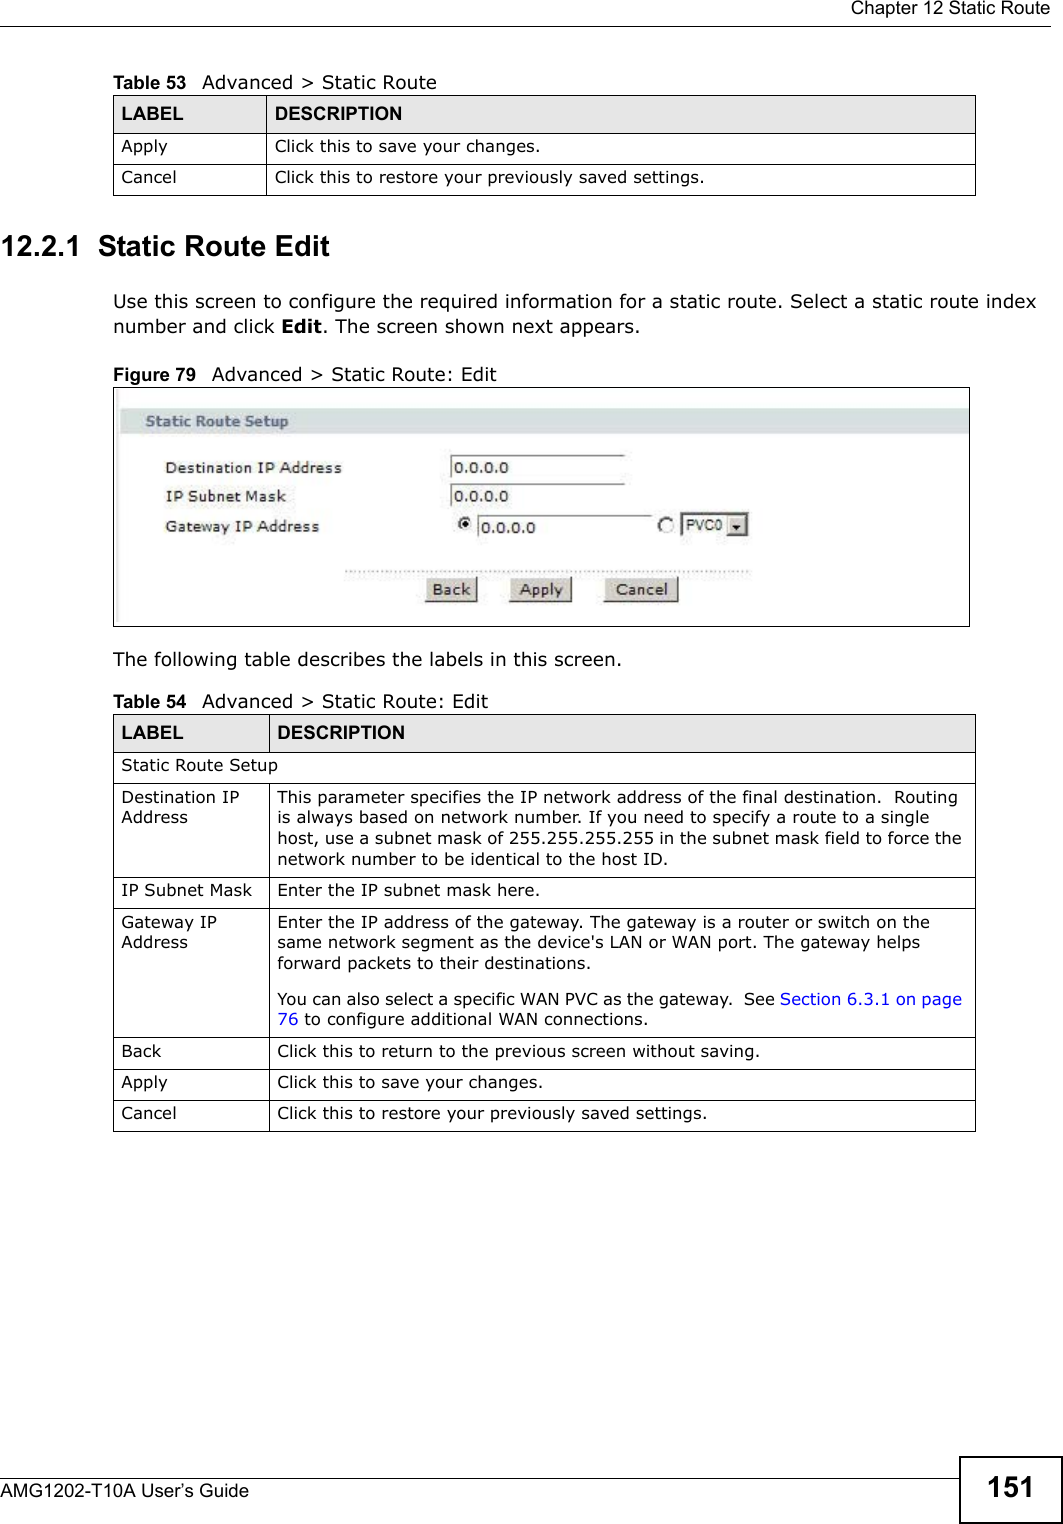  Chapter 12 Static RouteAMG1202-T10A User’s Guide 15112.2.1  Static Route Edit   Use this screen to configure the required information for a static route. Select a static route index number and click Edit. The screen shown next appears.Figure 79   Advanced &gt; Static Route: EditThe following table describes the labels in this screen. Apply Click this to save your changes.Cancel Click this to restore your previously saved settings.Table 53   Advanced &gt; Static RouteLABEL DESCRIPTIONTable 54   Advanced &gt; Static Route: EditLABEL DESCRIPTIONStatic Route SetupDestination IP AddressThis parameter specifies the IP network address of the final destination.  Routing is always based on network number. If you need to specify a route to a single host, use a subnet mask of 255.255.255.255 in the subnet mask field to force the network number to be identical to the host ID.IP Subnet Mask  Enter the IP subnet mask here.Gateway IP AddressEnter the IP address of the gateway. The gateway is a router or switch on the same network segment as the device&apos;s LAN or WAN port. The gateway helps forward packets to their destinations.You can also select a specific WAN PVC as the gateway.  See Section 6.3.1 on page 76 to configure additional WAN connections.Back Click this to return to the previous screen without saving.Apply Click this to save your changes.Cancel Click this to restore your previously saved settings.